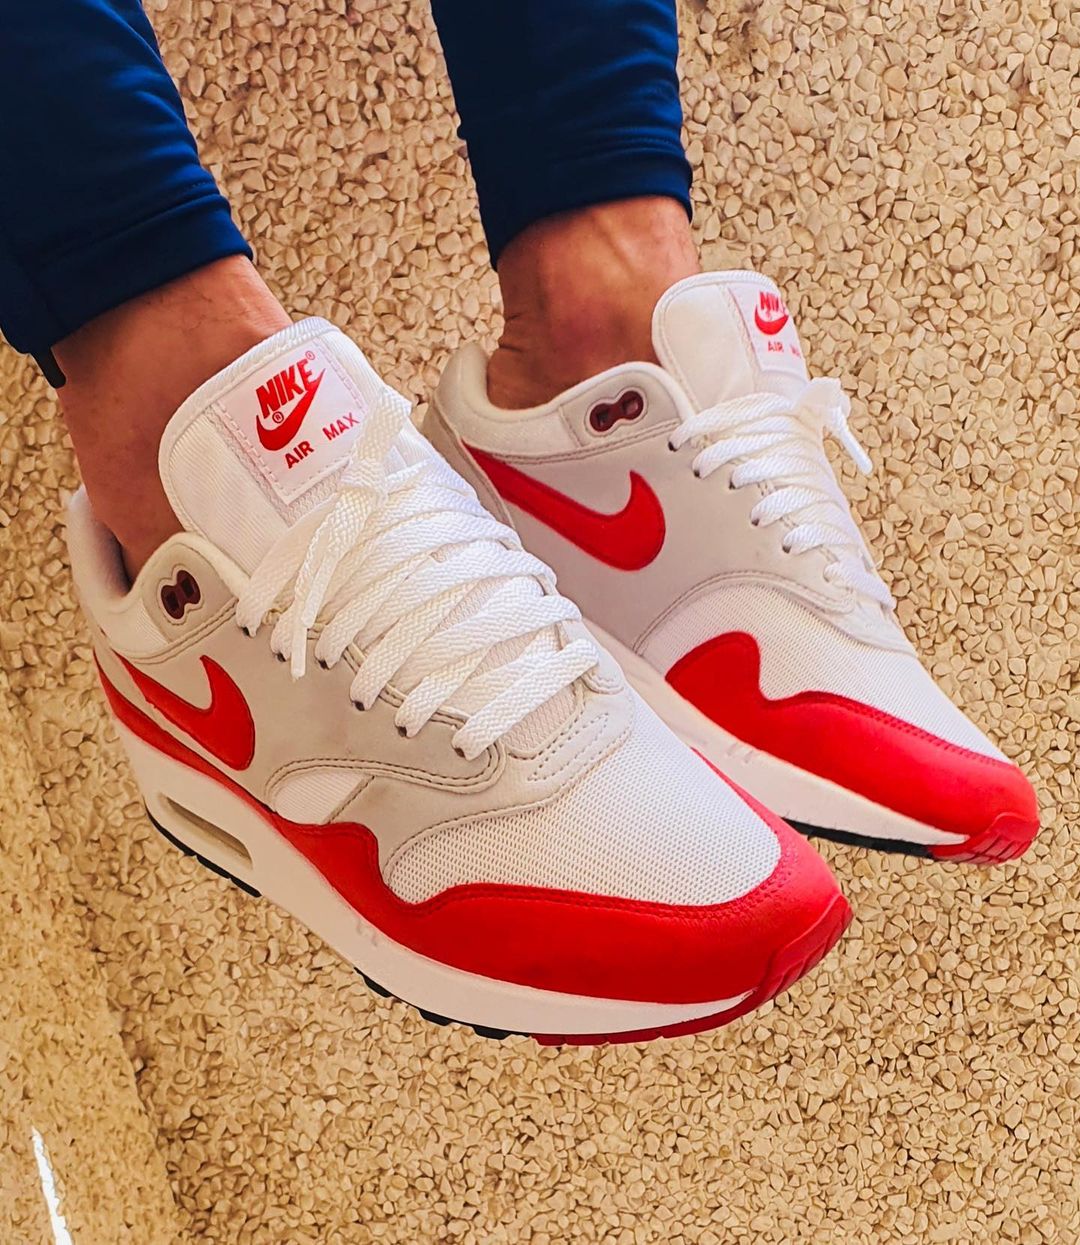 Nike Air Max 1 OG Red Big Bubble @sbuttenbruch